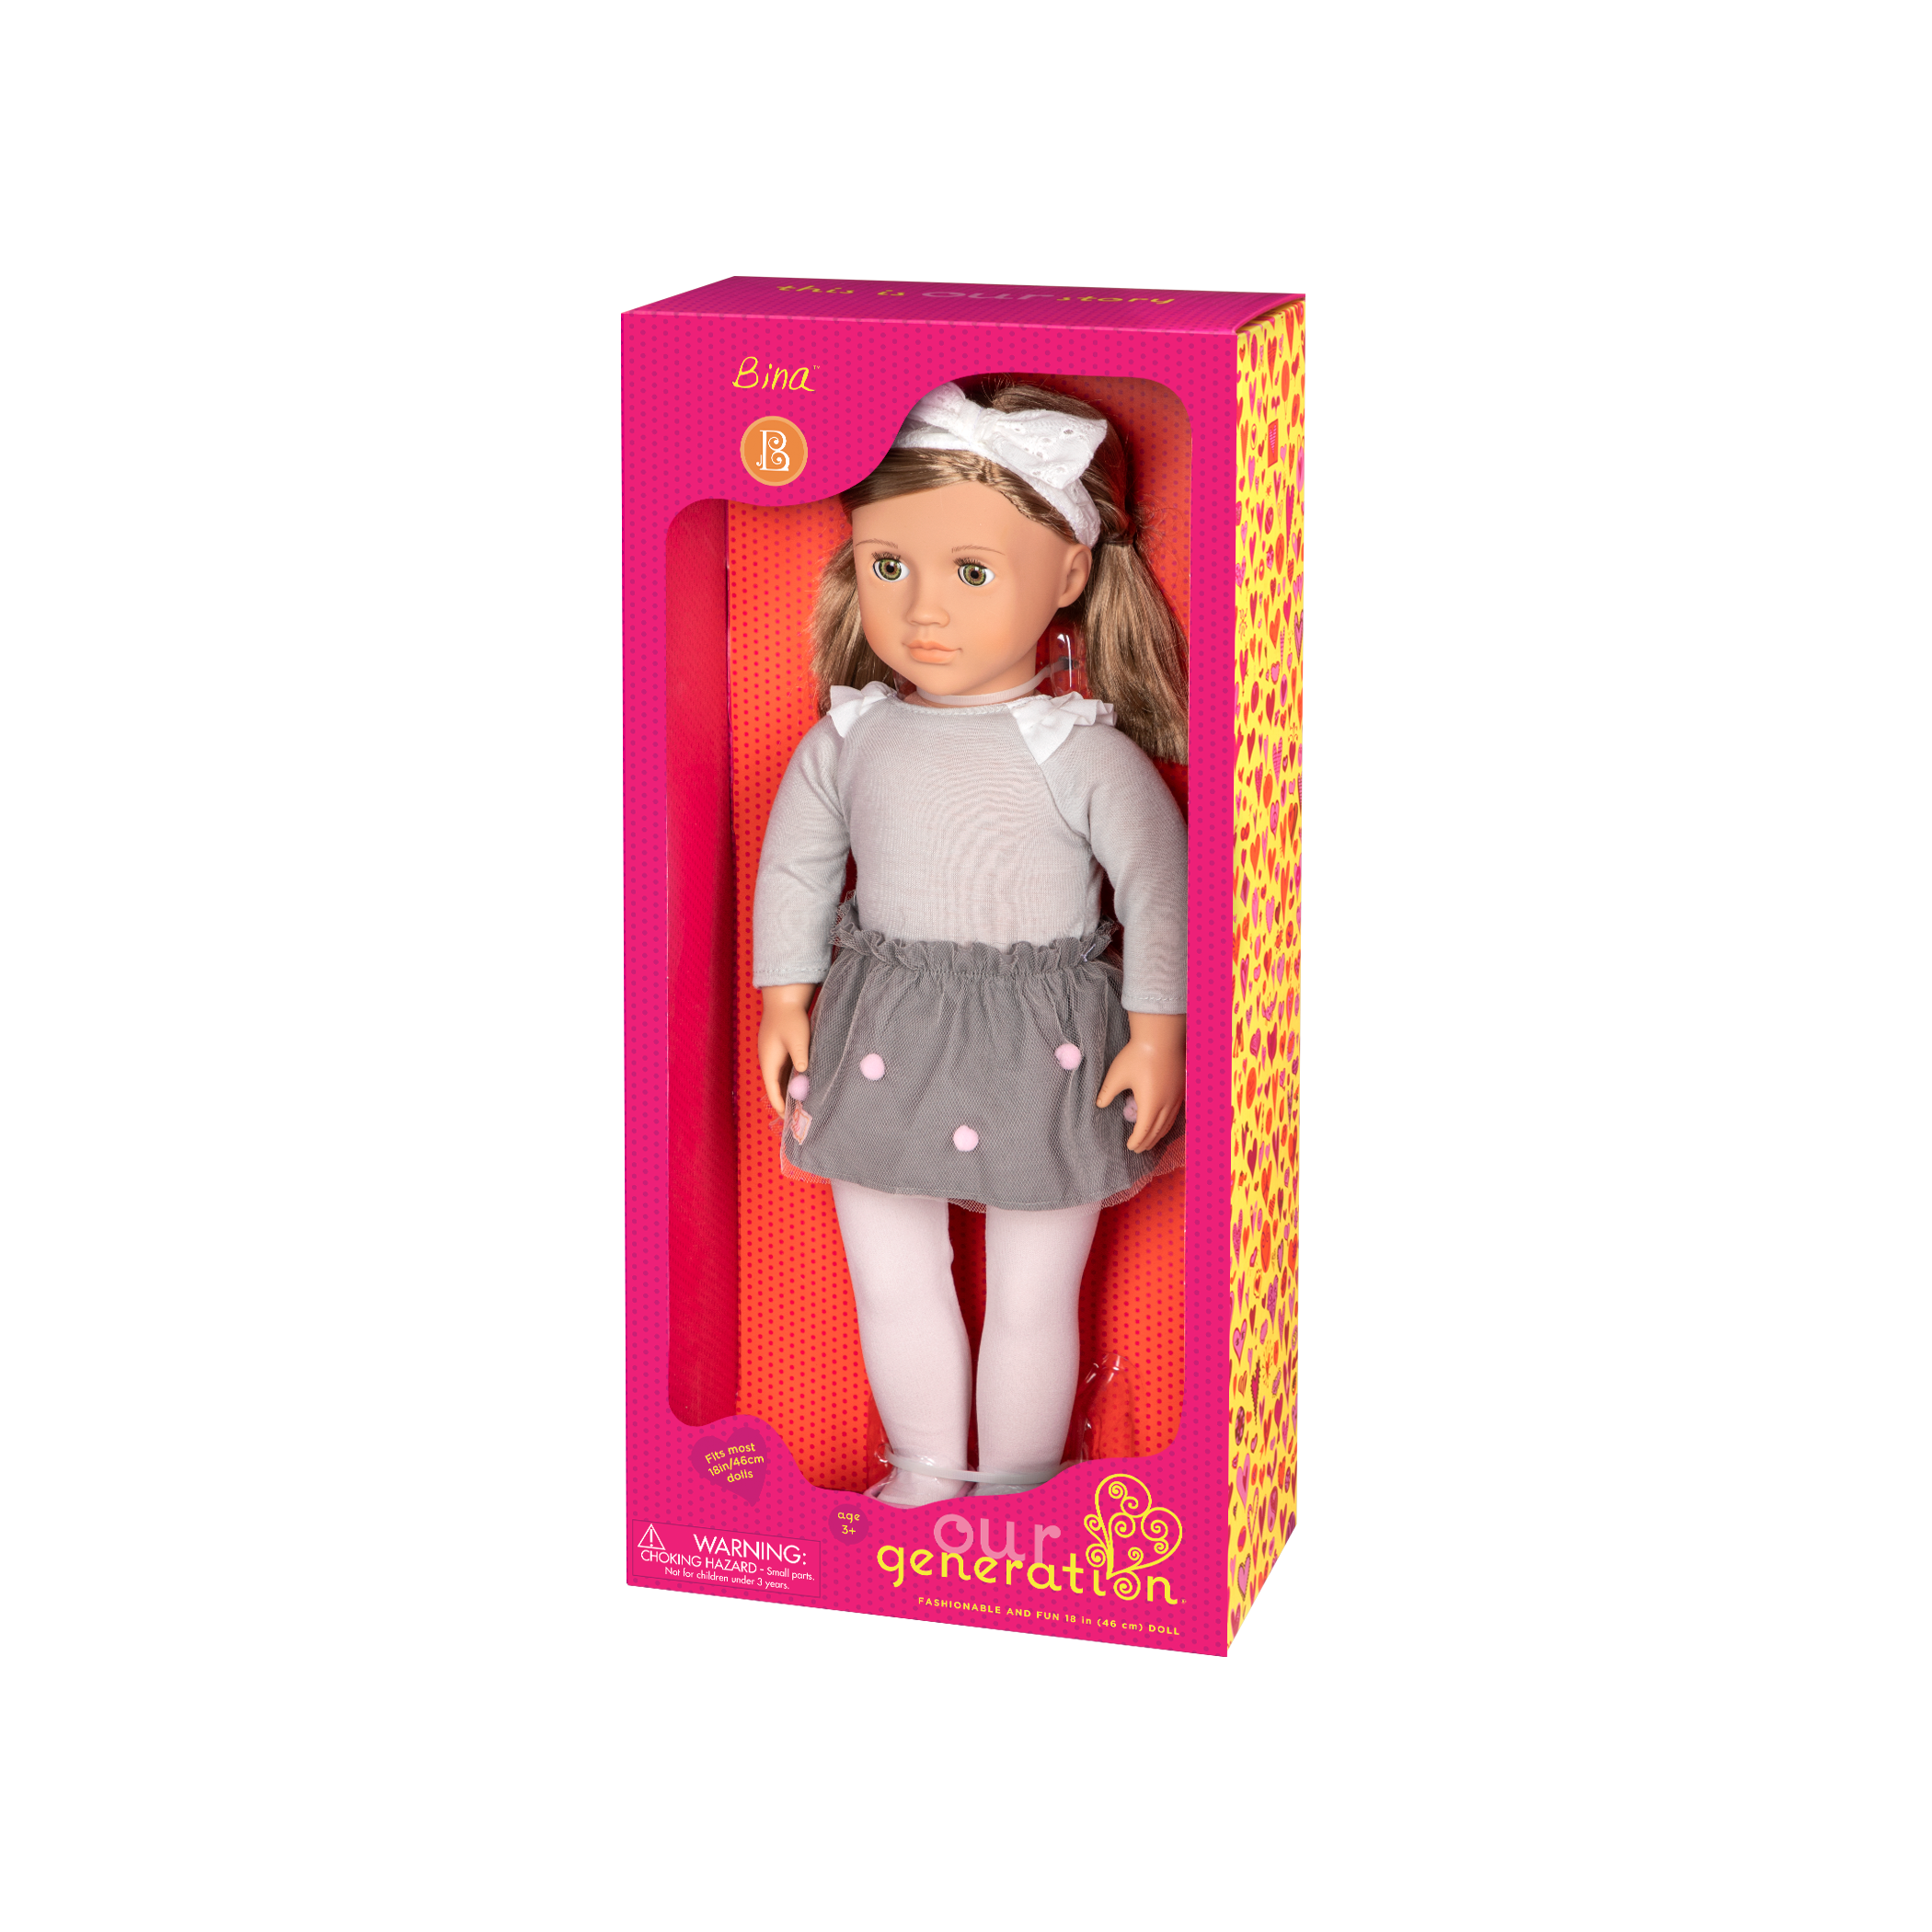 18-inch doll with light-brown hair and green eyes